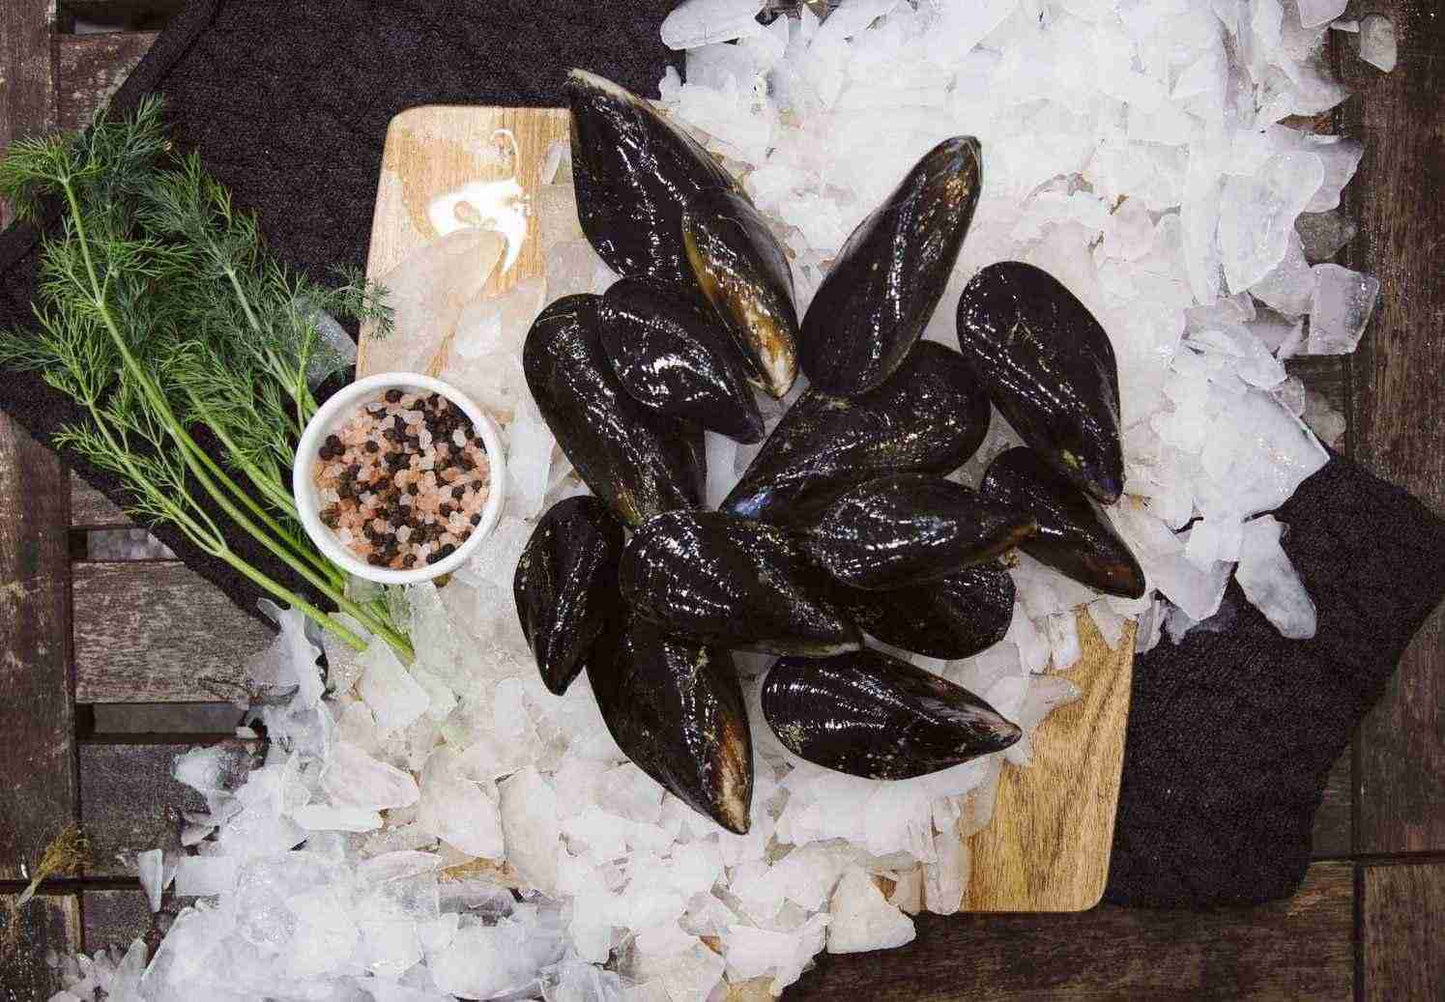 Live Blue Mussels